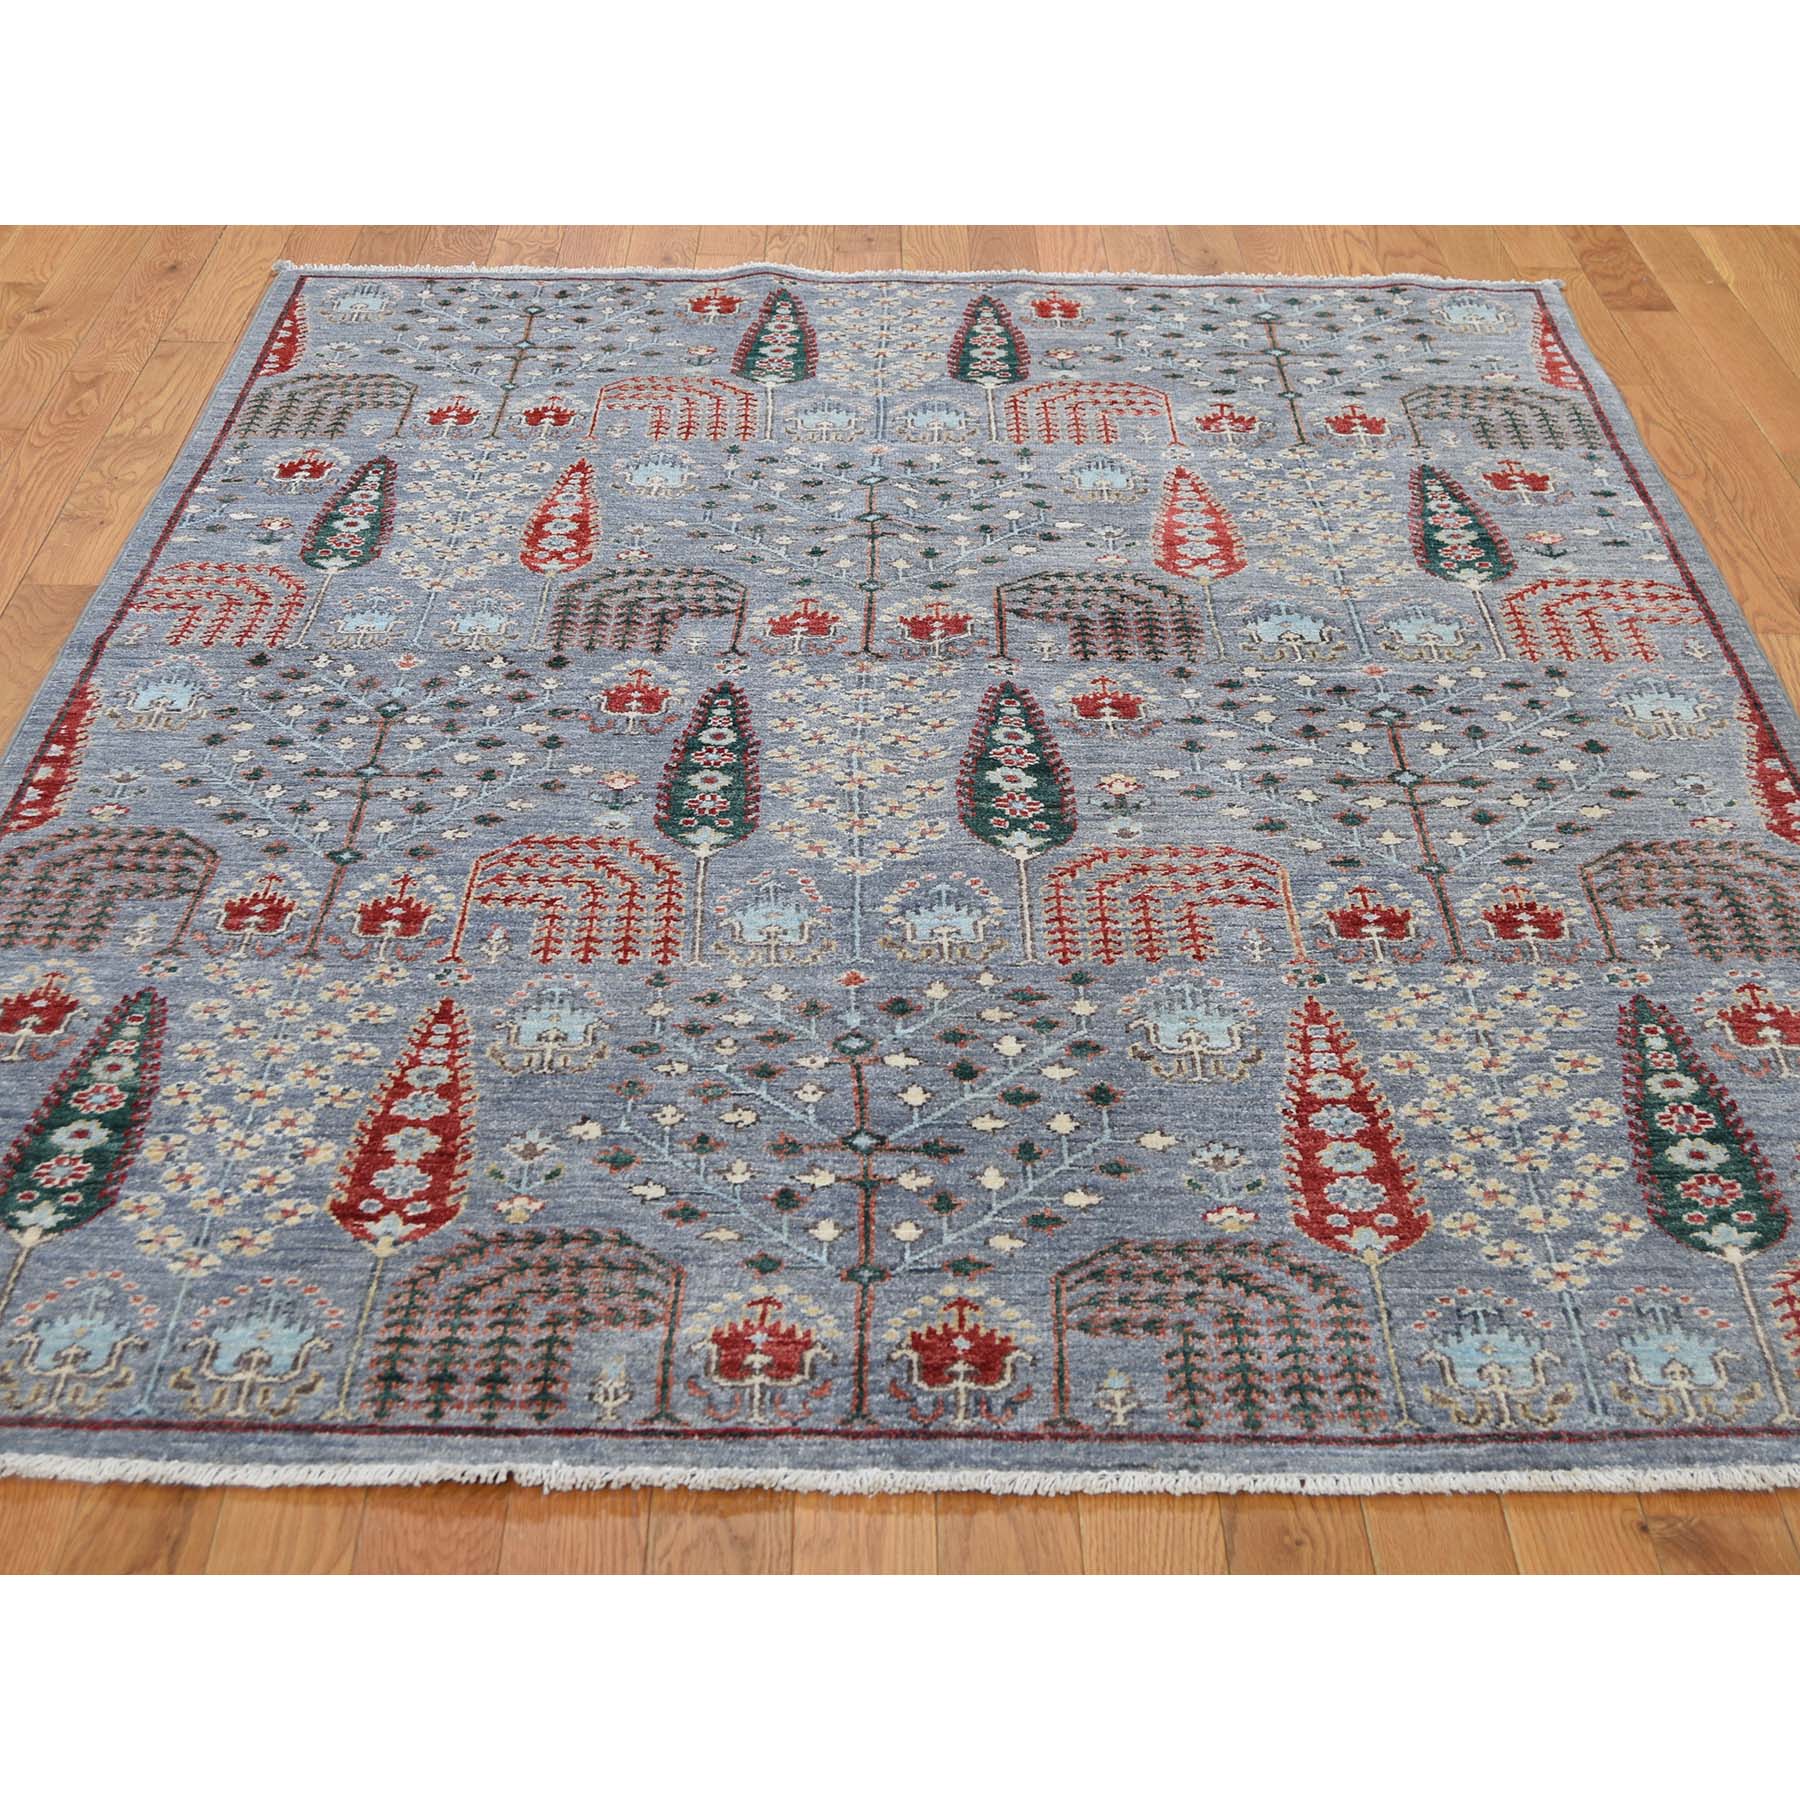 5-1 x7- Hand-Knotted Peshawar Willow & Cypress Tree Design Oriental Rug 